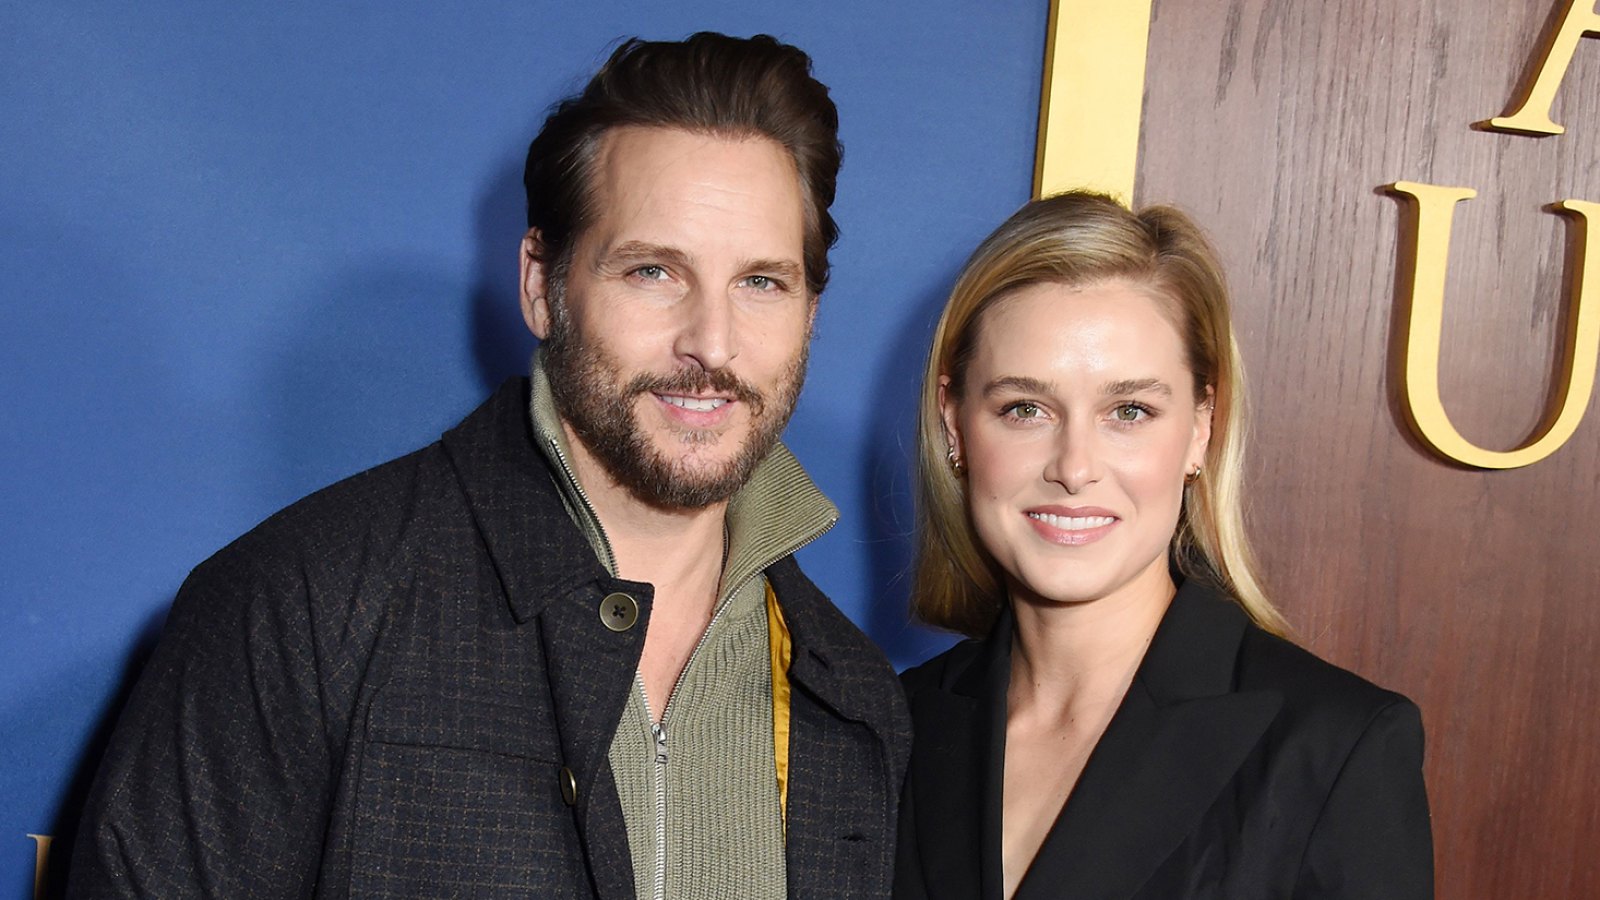 Peter Facinelli Trolls Fiancee Lily Anne Harrison Over Pregnancy News: ‘Why Didn’t You Tell Me?’